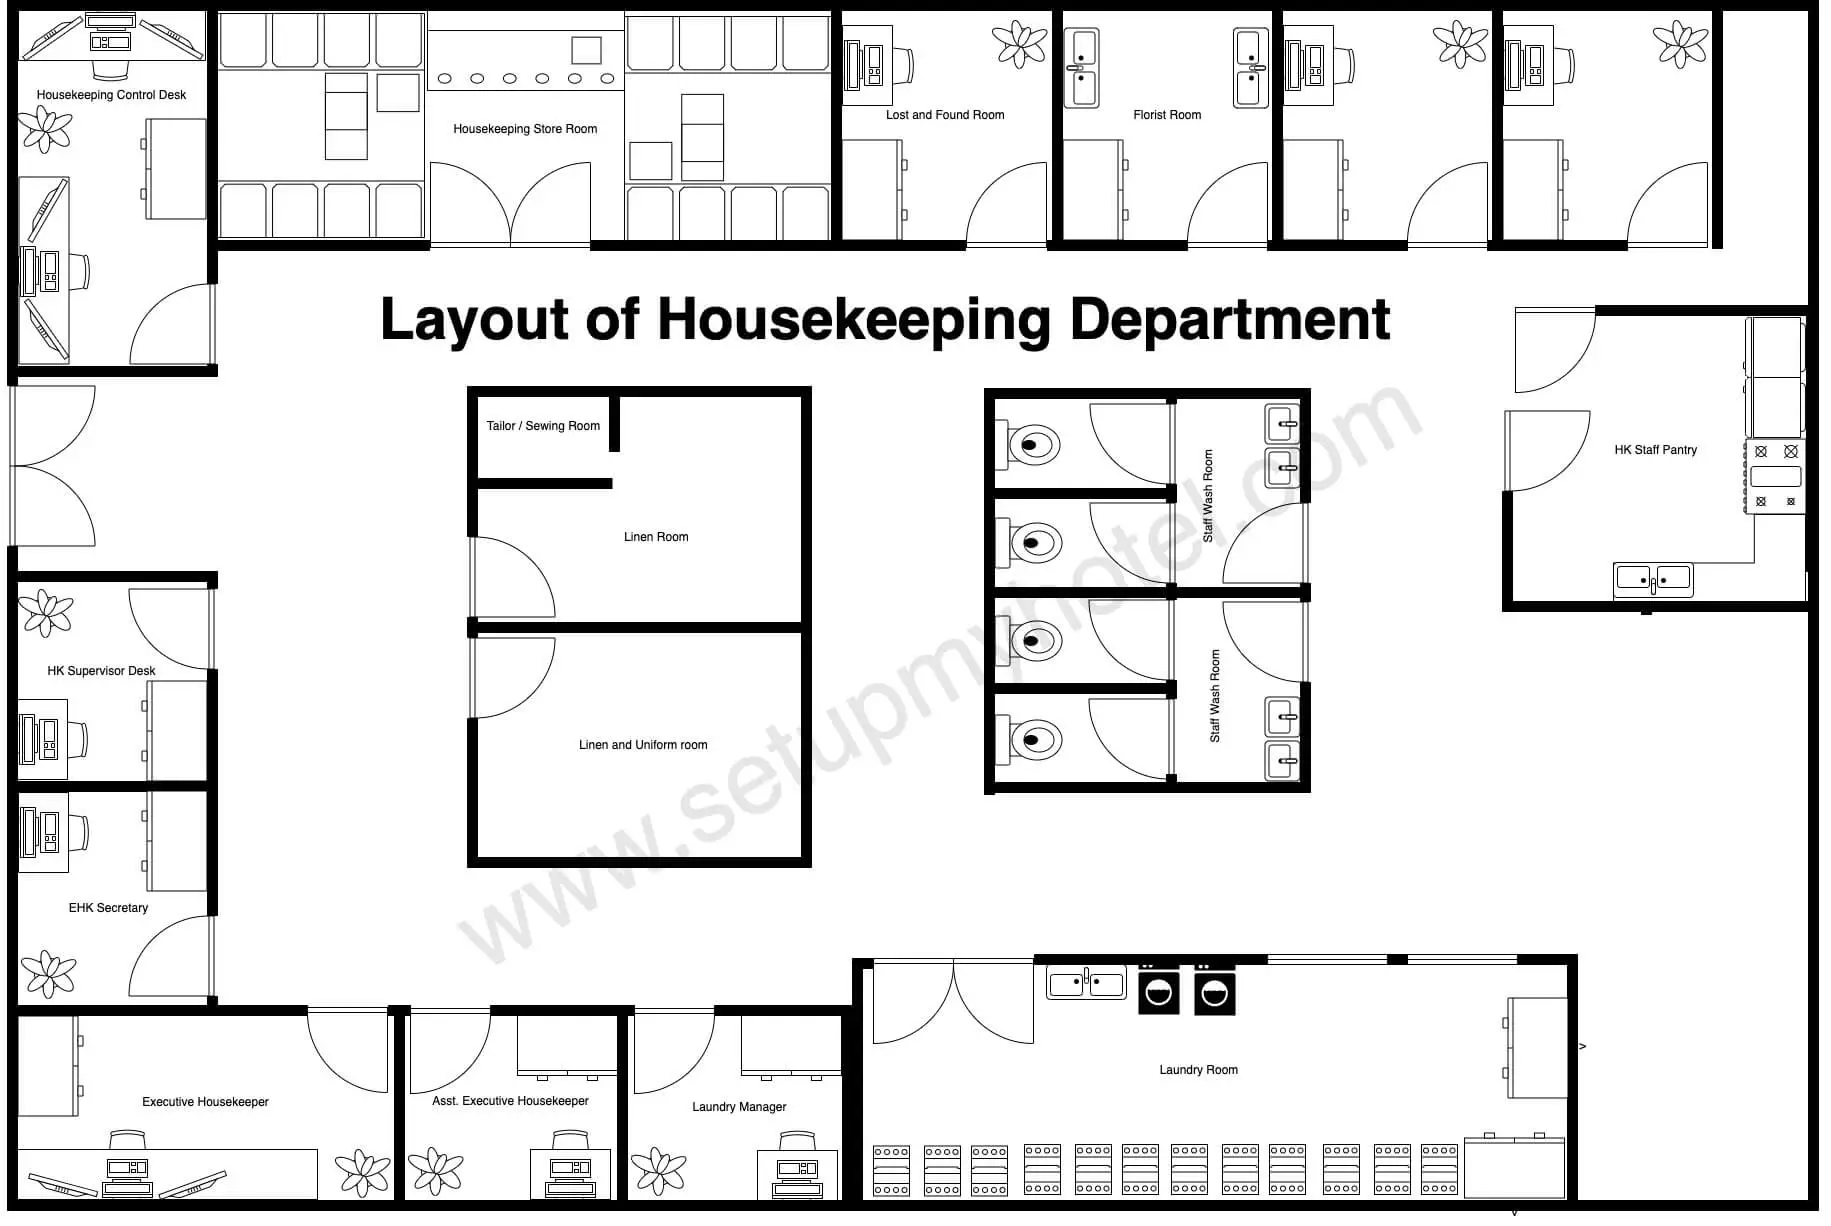 The layout of the housekeeping is the physical demarcation of areas in the department. When the layout is well-planned, it enables the smooth functioning of the department. The layout is dependent on the size of the hotel as well as physical space restrictions. Normally, the layout is decided by the executive housekeeper, at the facility planning stage in setting up the hotel.